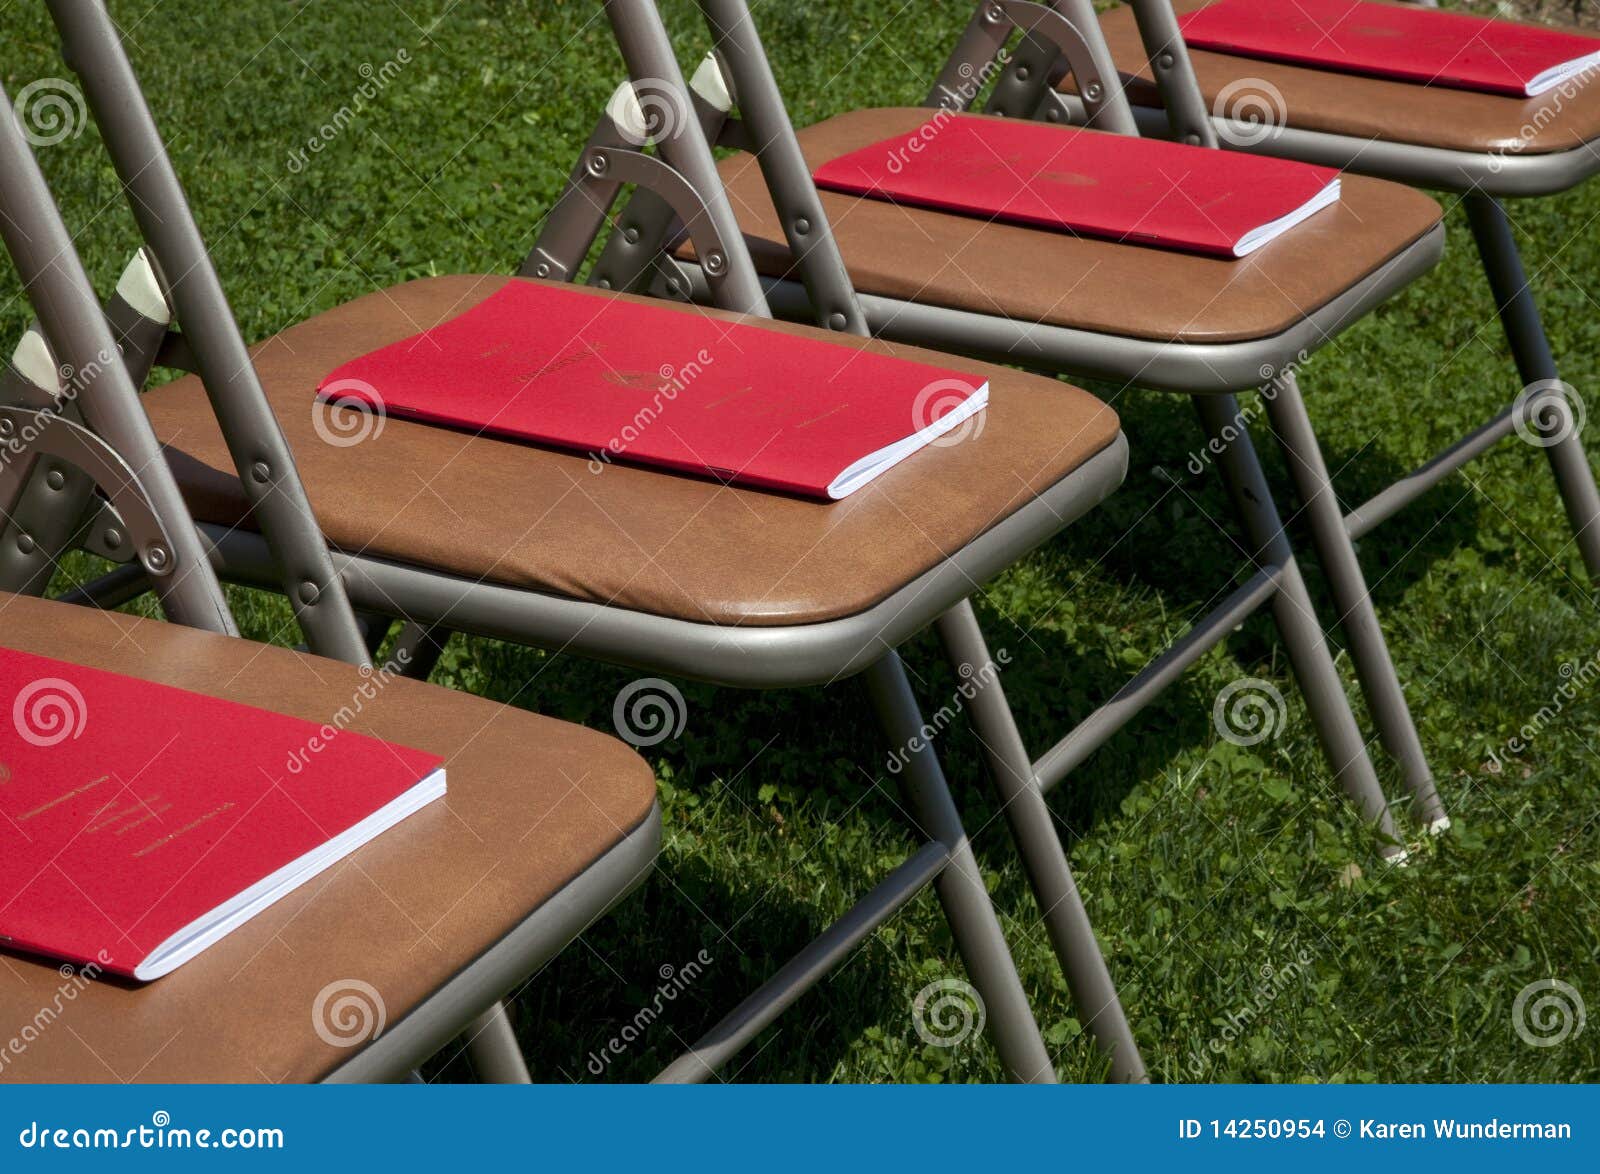 commencement programs on chairs